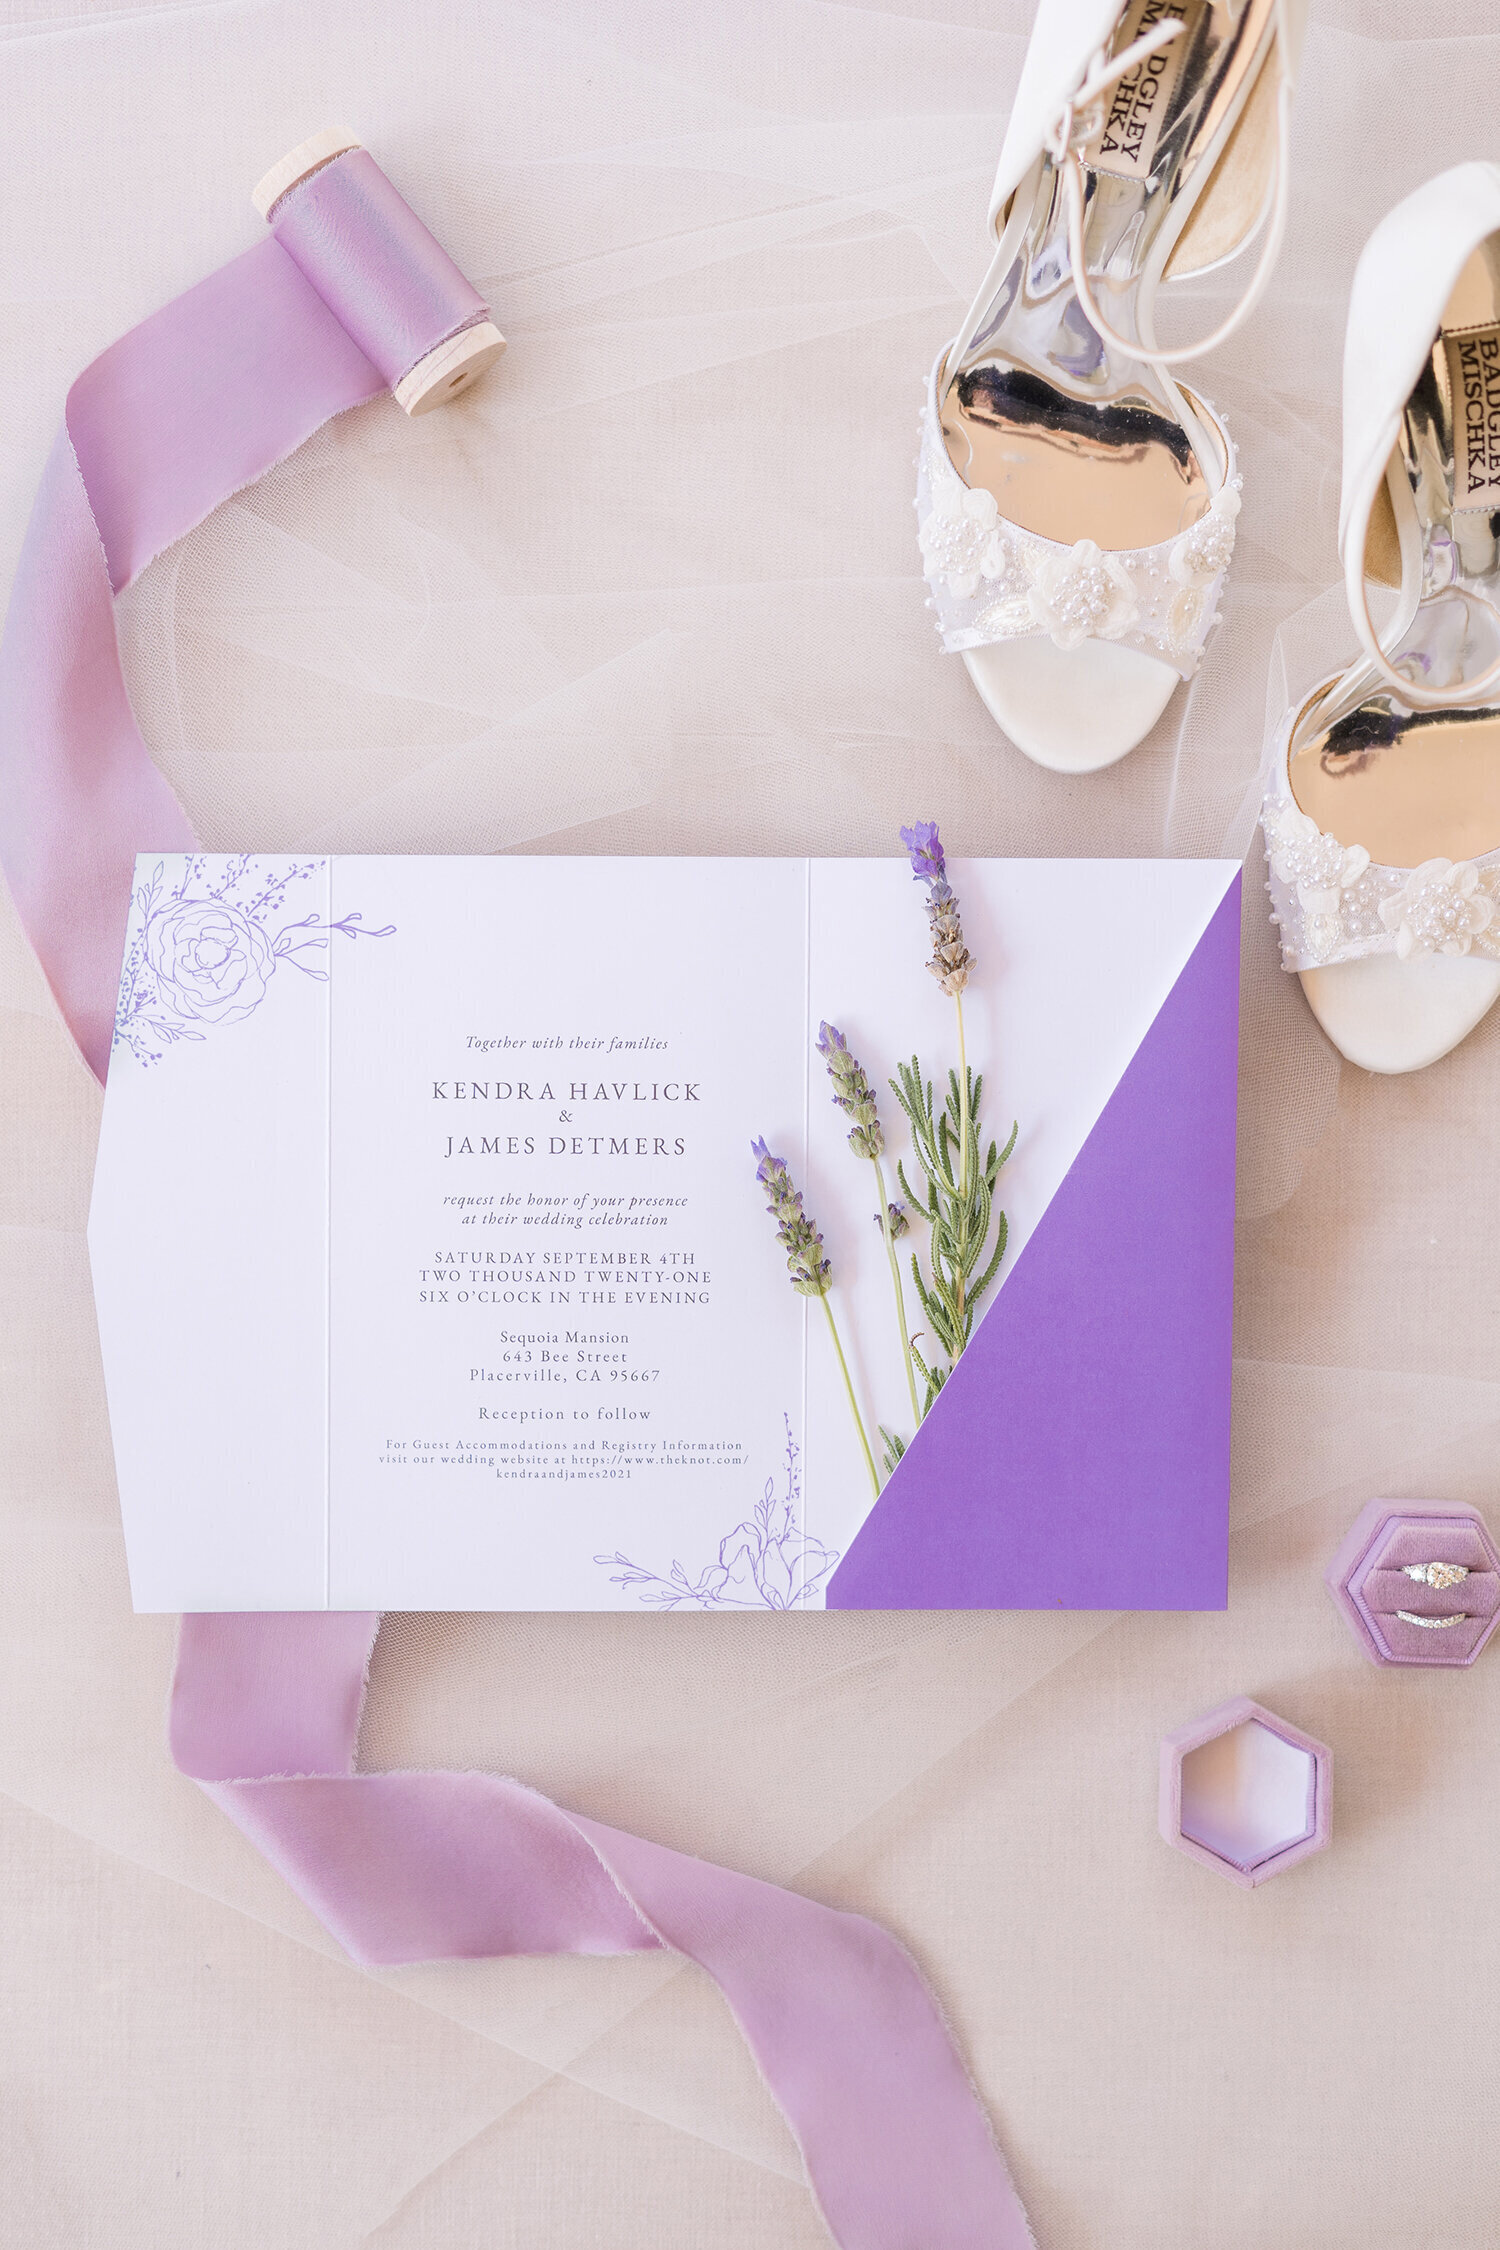 bridal details and wedding invitation at a sequoia mansion placerville wedding